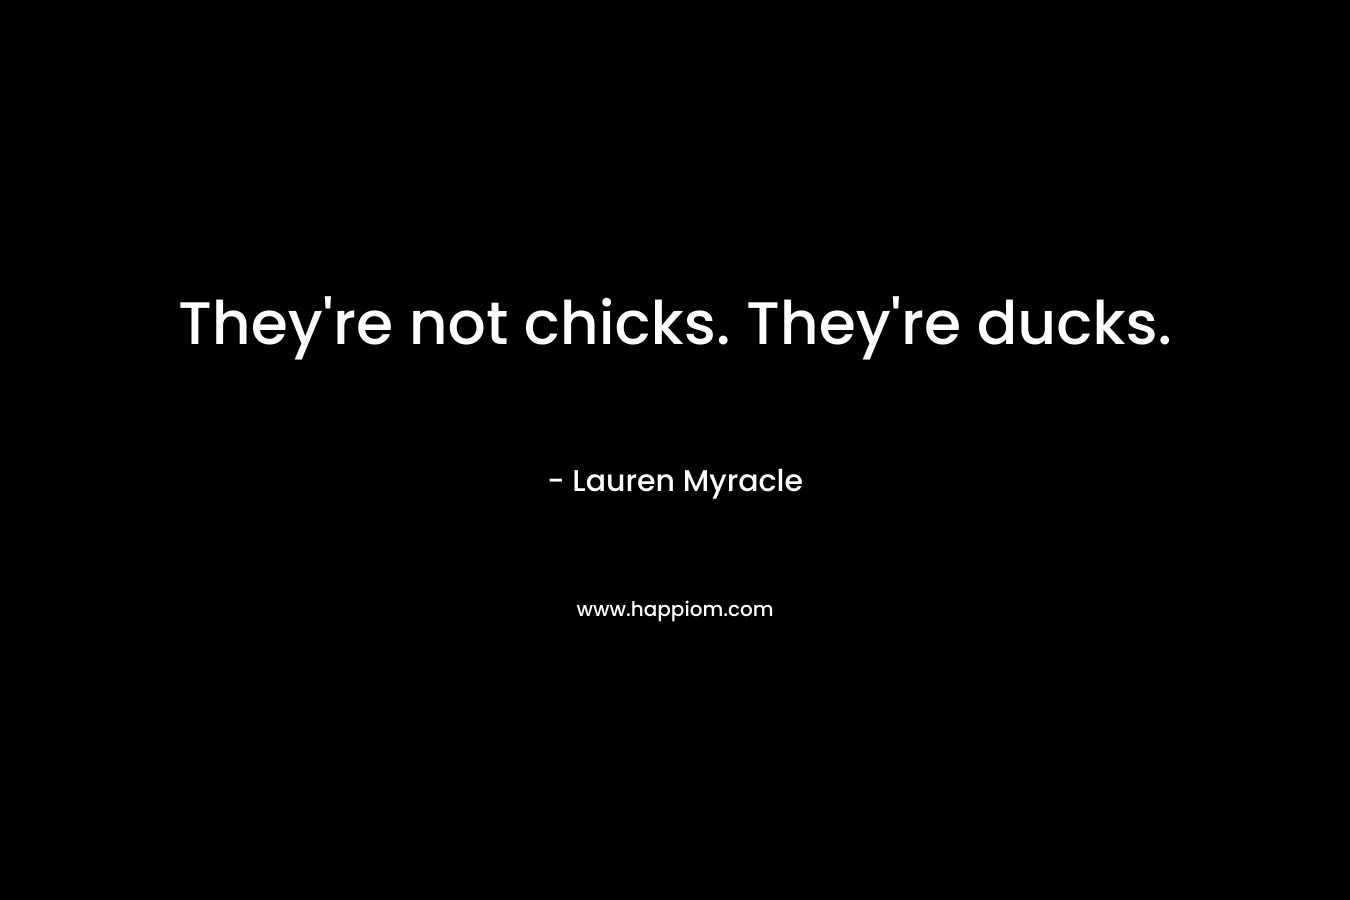 They're not chicks. They're ducks.